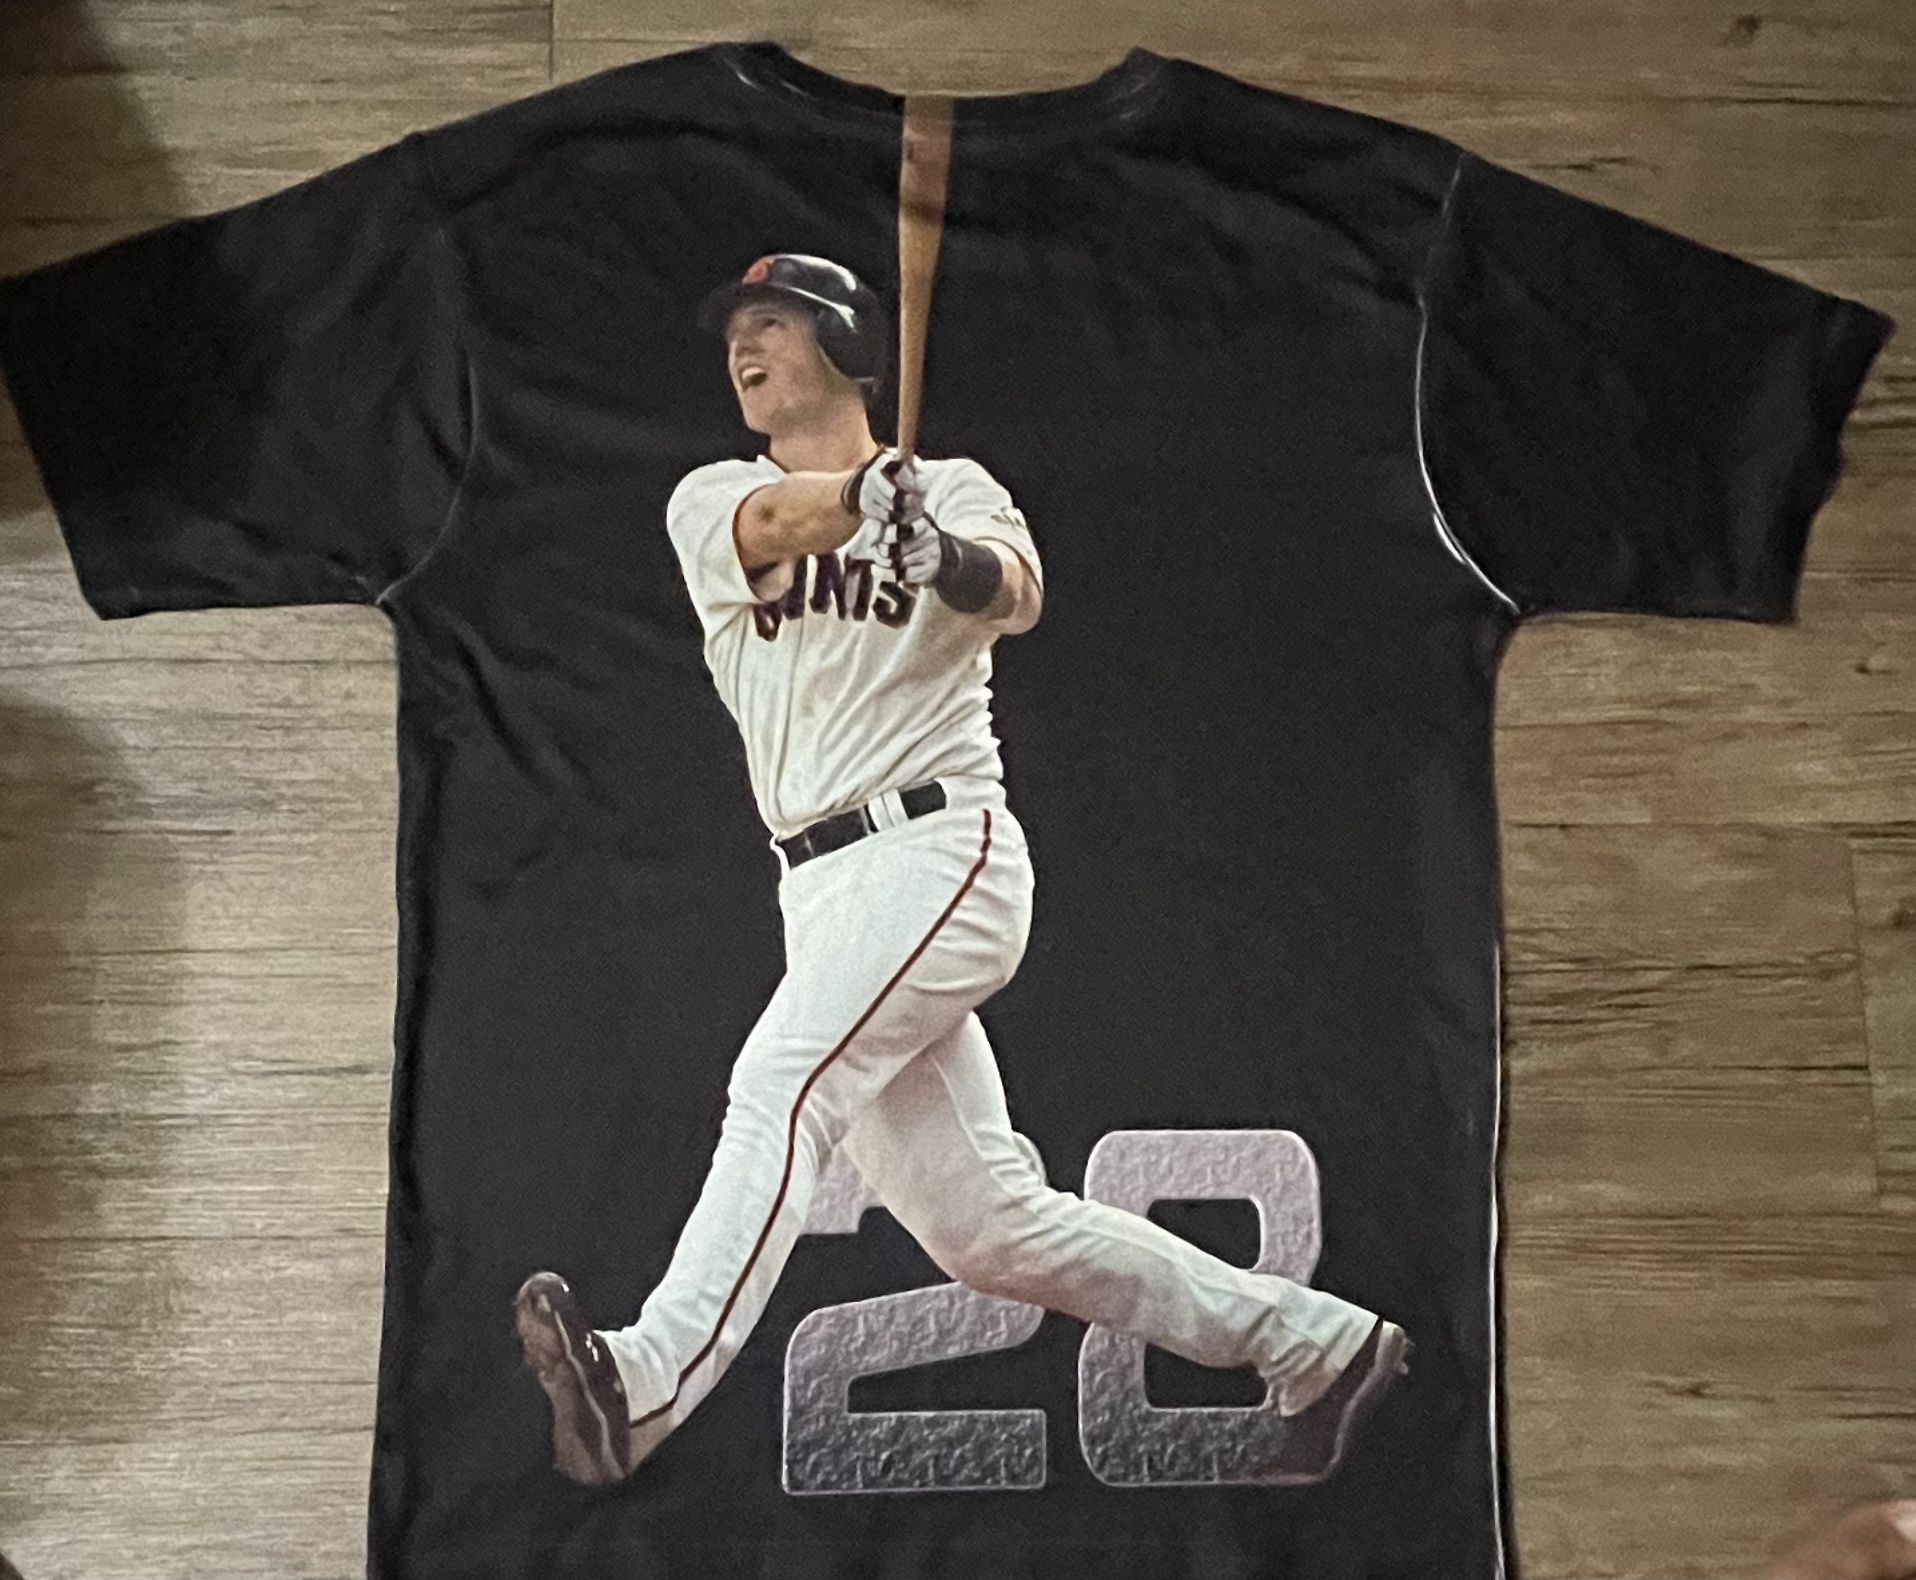 San Francisco Giants #28 Buster Posey Graphite Series. Mens LARGE. $15.00